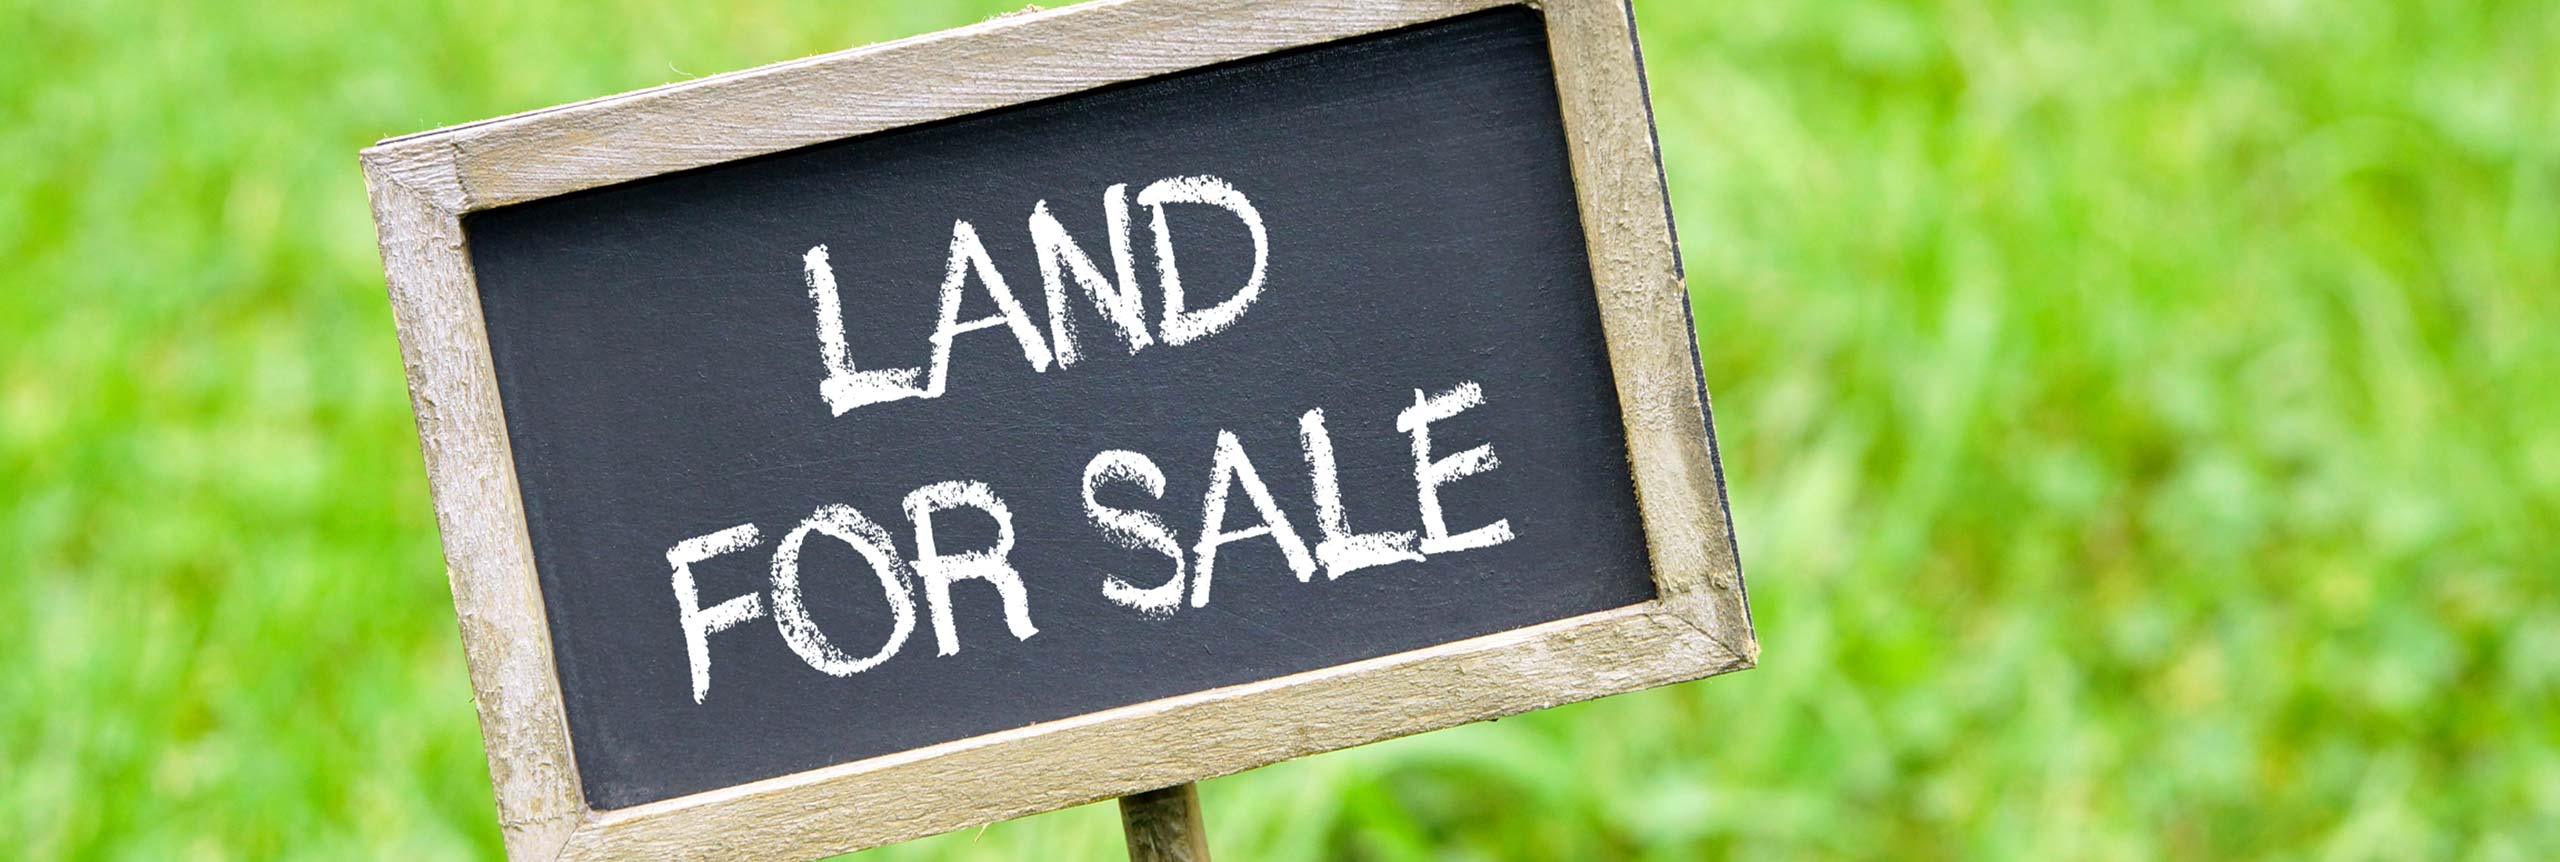 Land for sale Stock Photos & Royalty-Free Images - Depositphotos